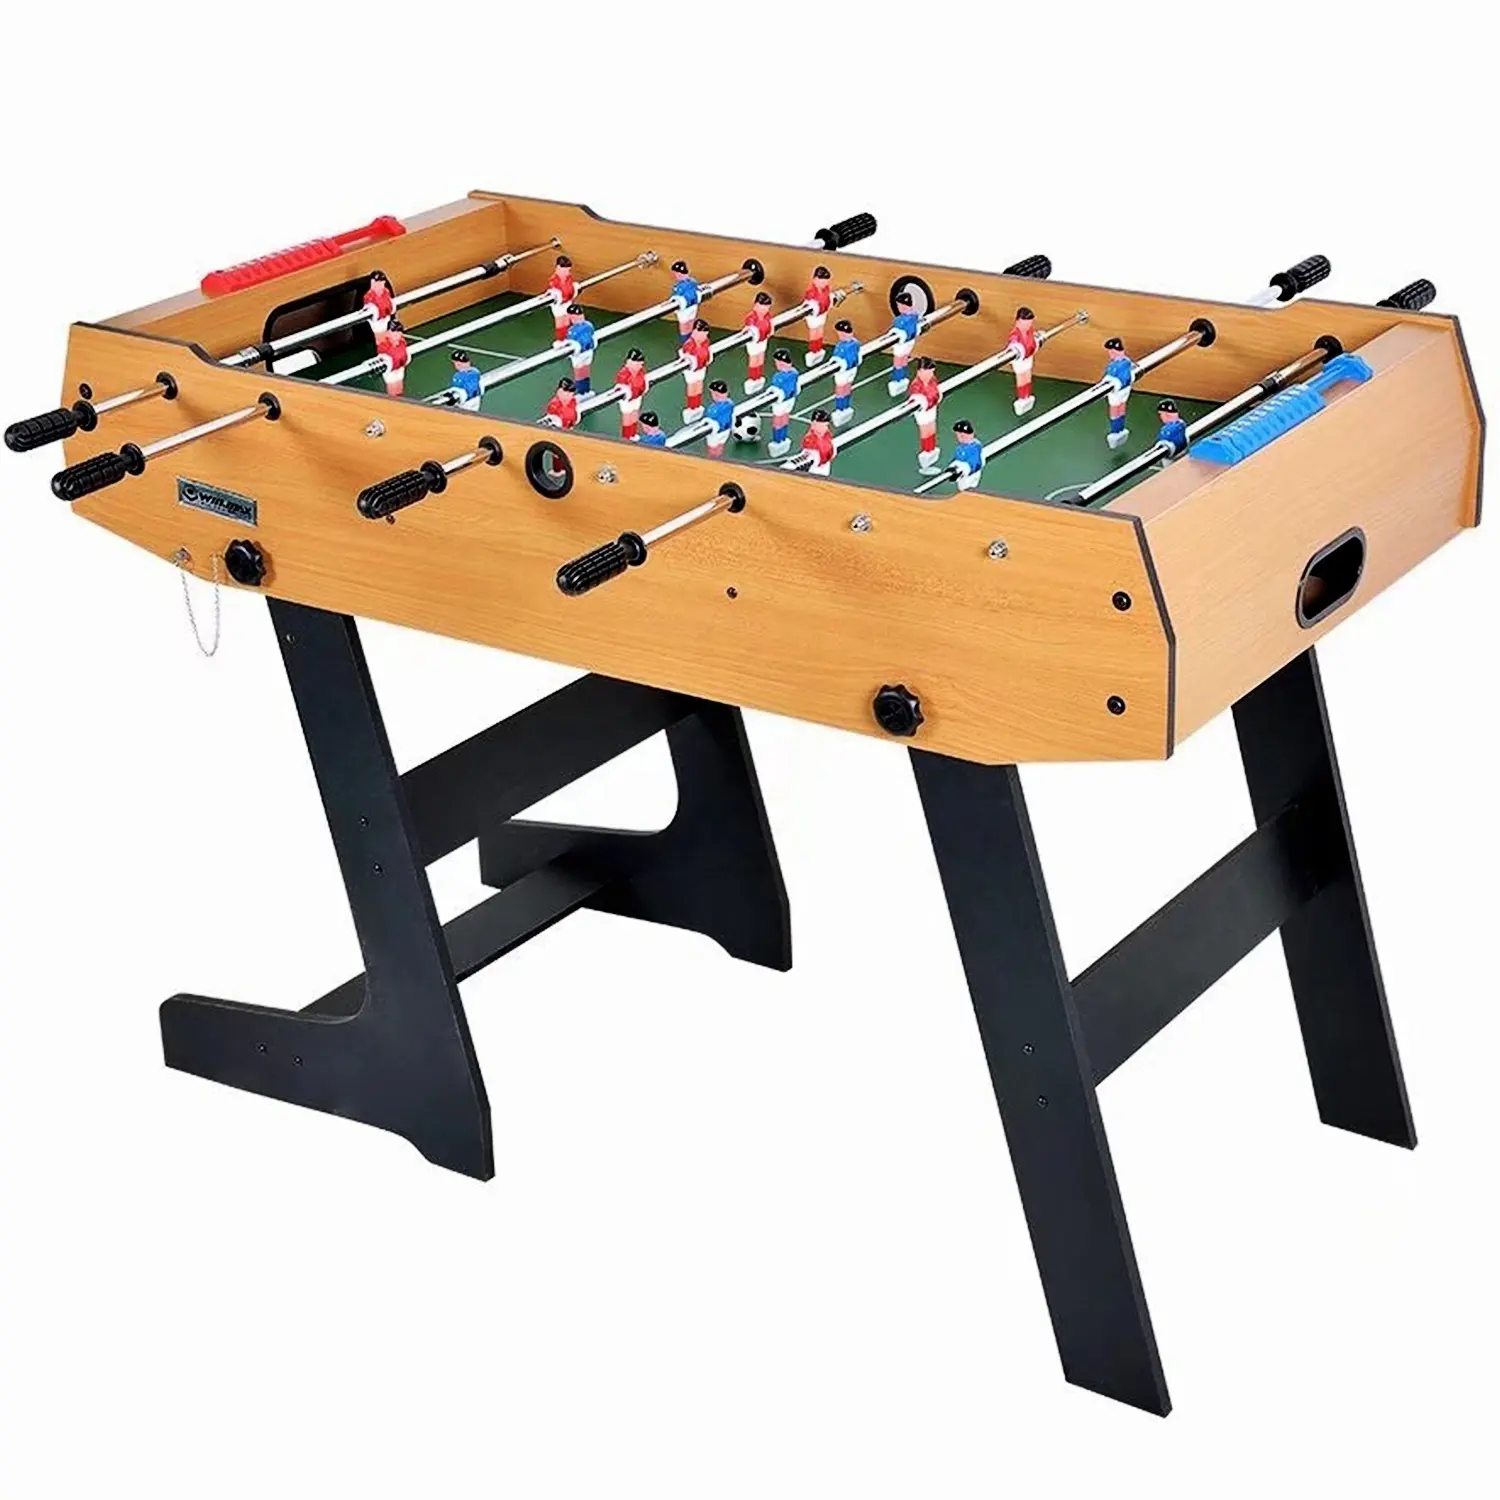 Win.max Save space fancy foldable soccer game table for kids and adult